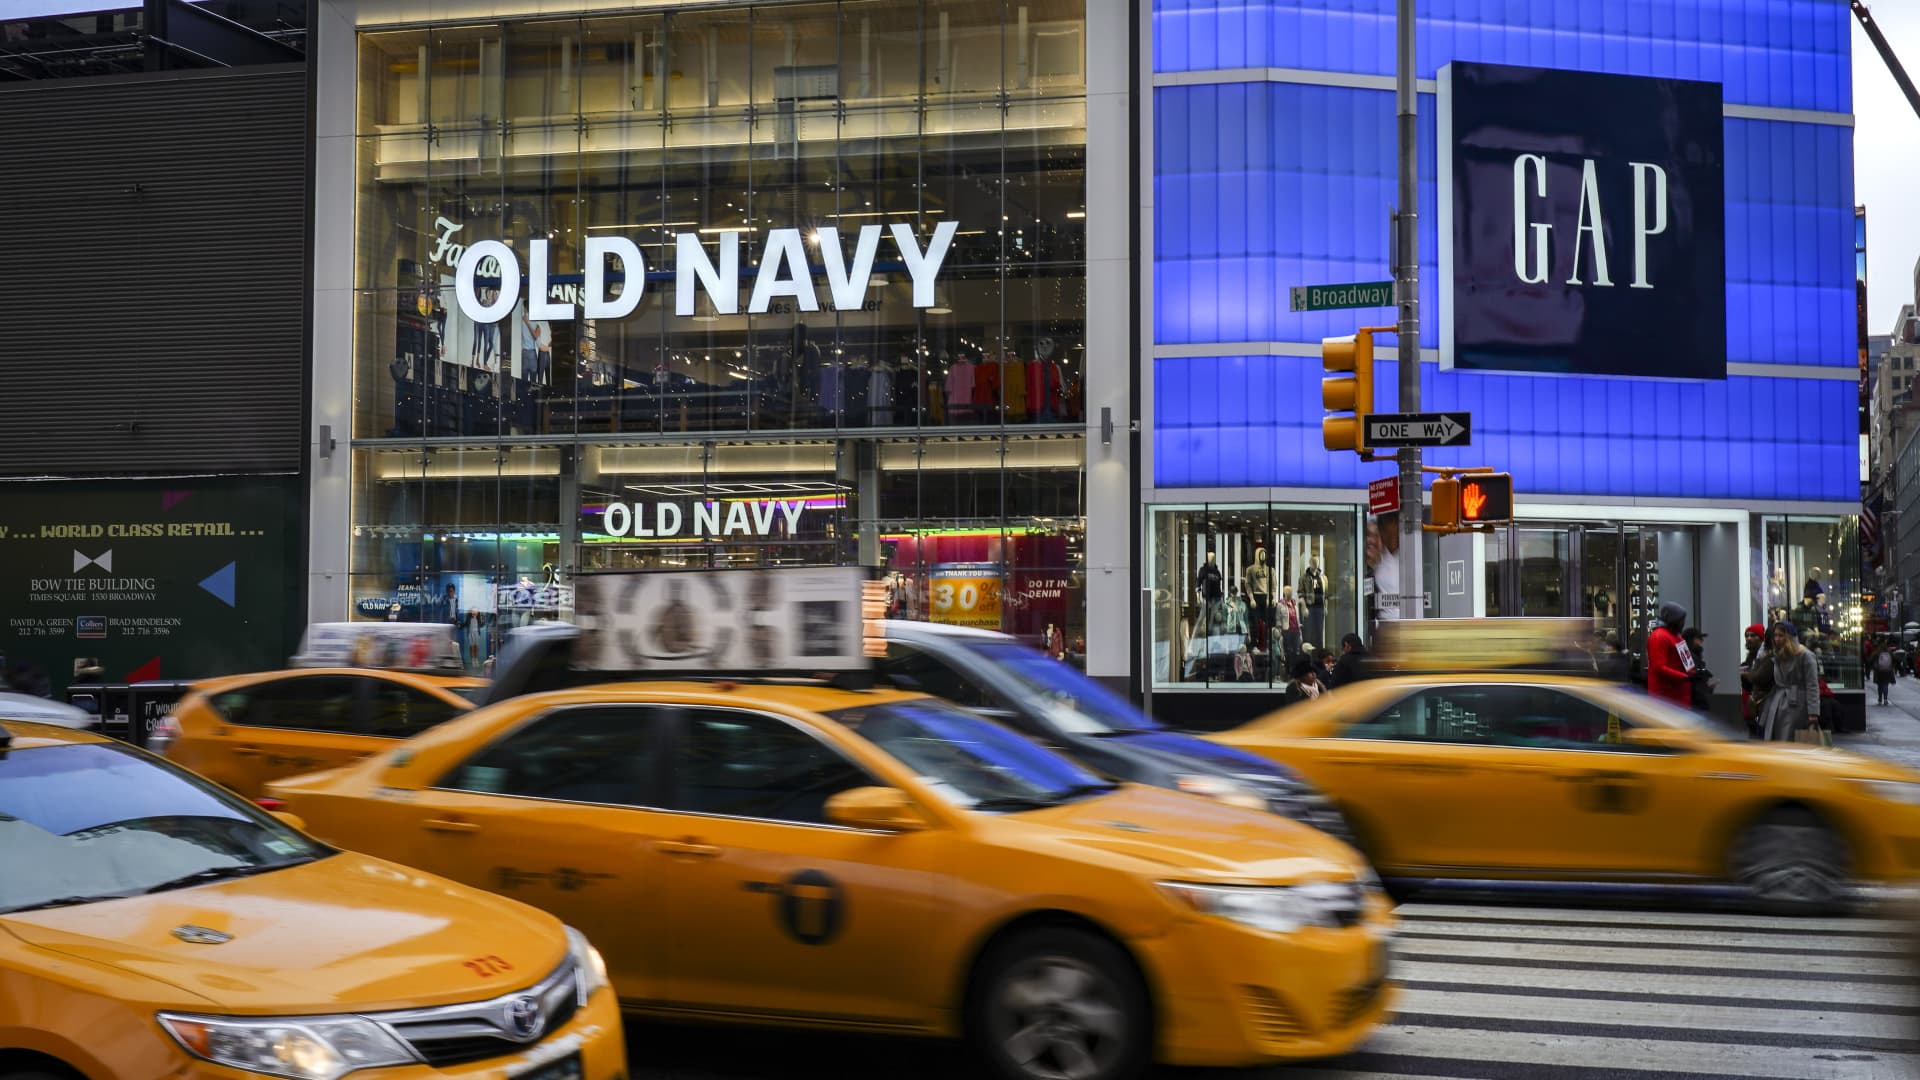 Traffic passes by an Old Navy and GAP stores in Times Square, March 1, 2019 in New York City.